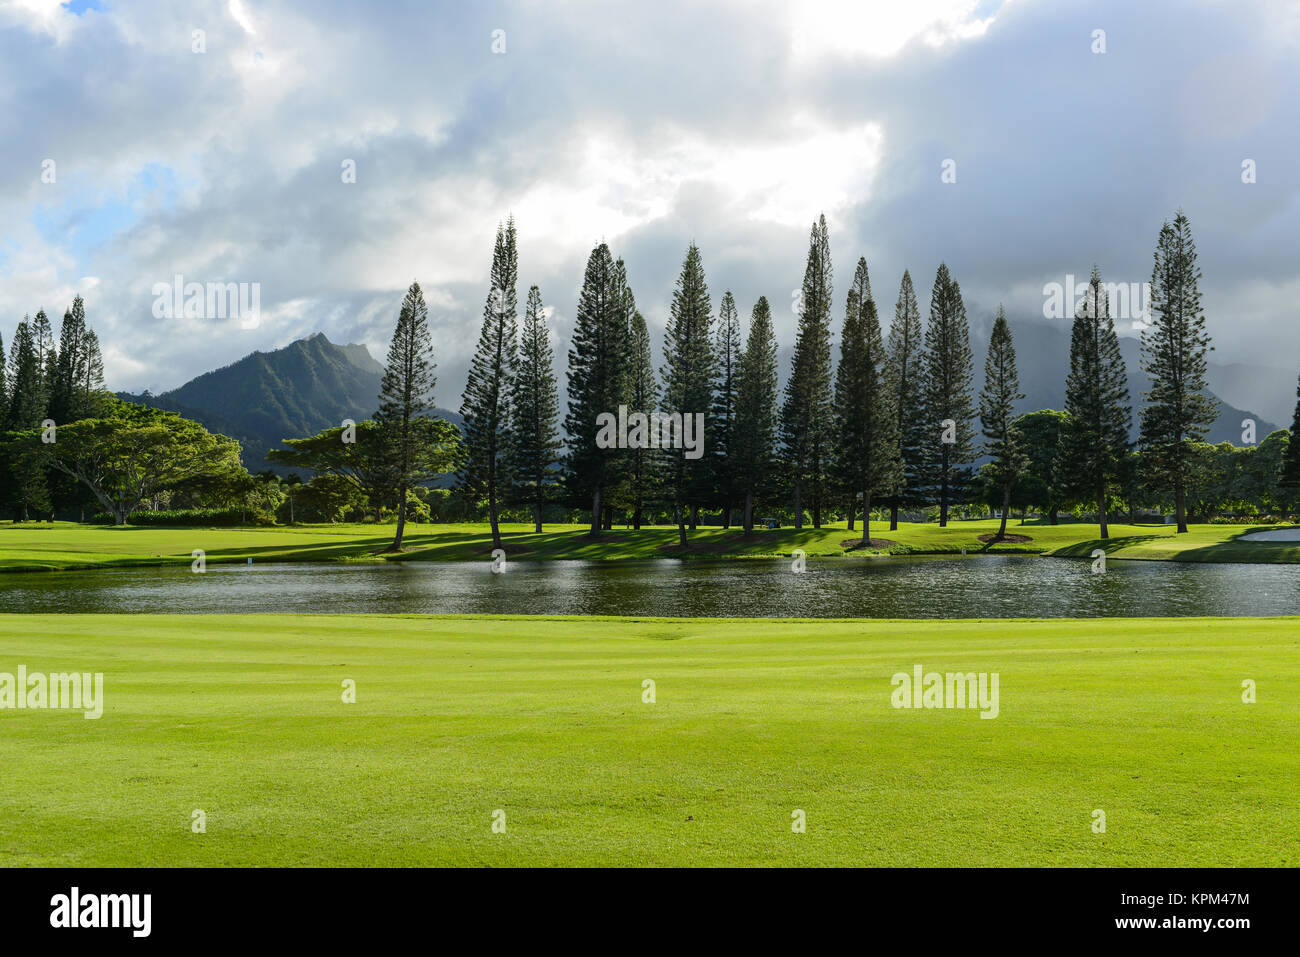 Tropical Island - Tall norfolk pine grove, surrounded by a small pond and green meadows, against the misty mountains and cloudy sky in the background. Stock Photo